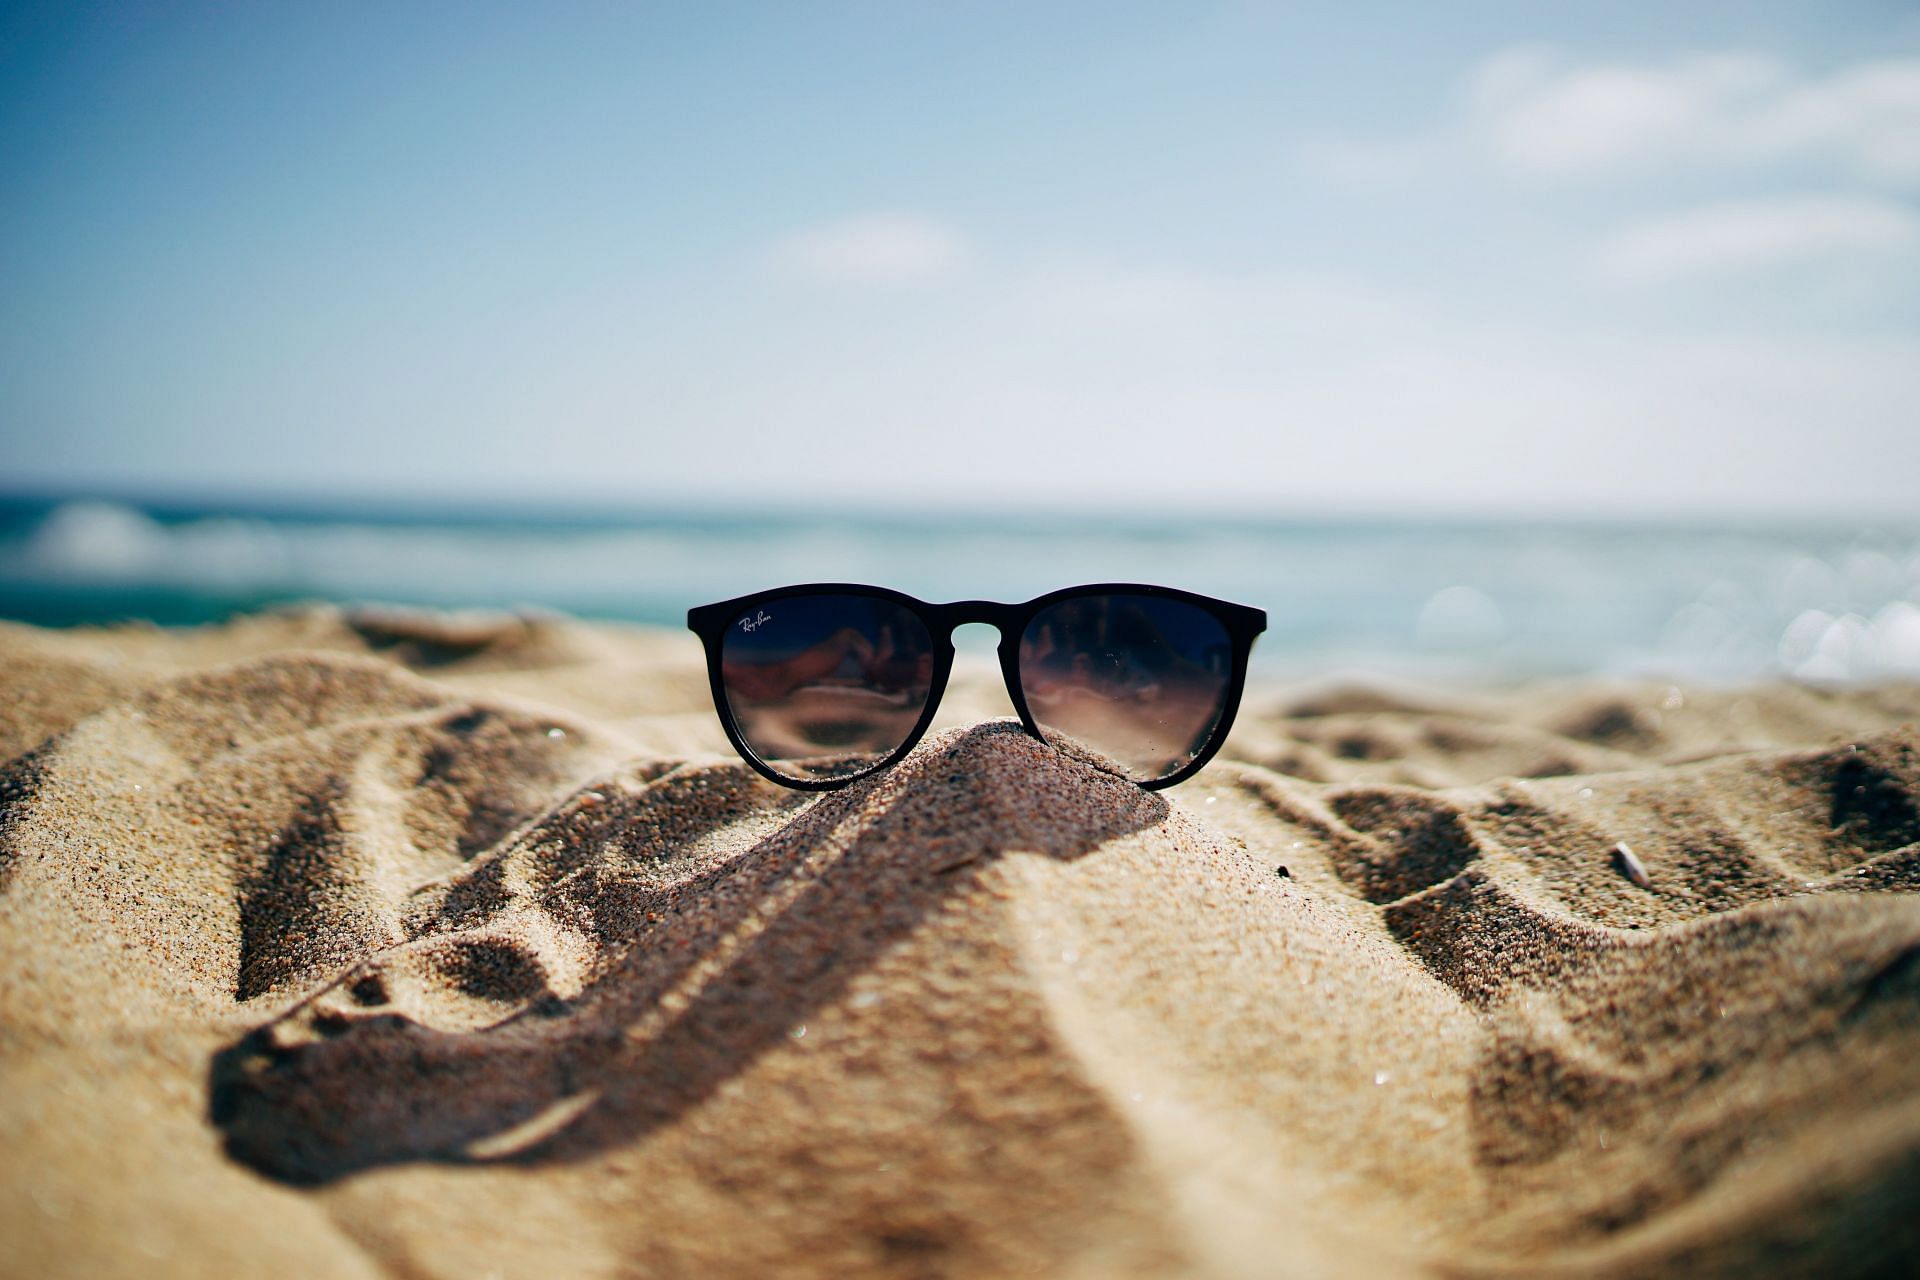 Excess sun exposure can lead to heat strokes. (Image via Unsplash/Ethan Robertson)